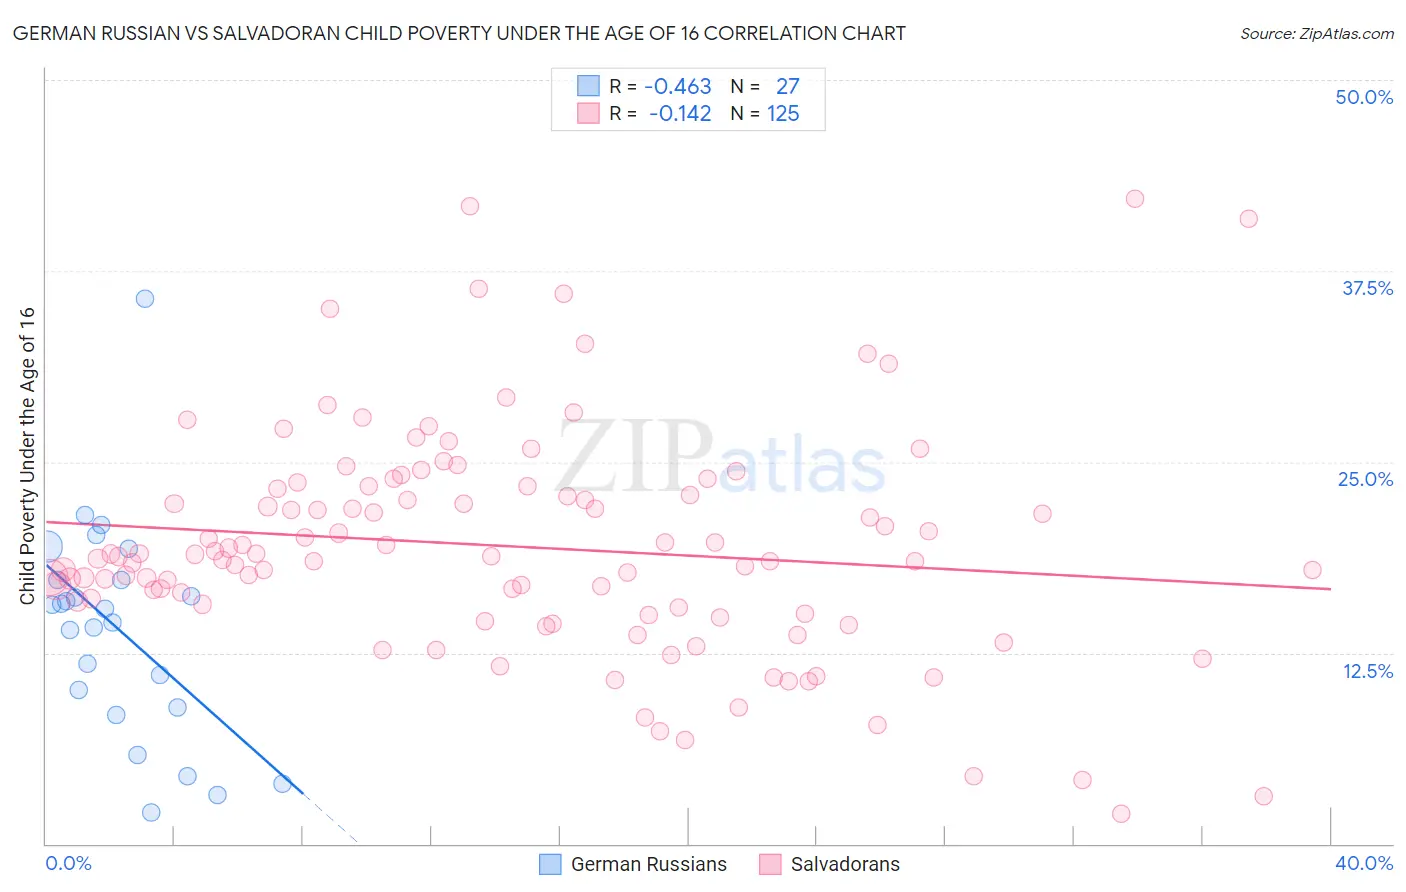 German Russian vs Salvadoran Child Poverty Under the Age of 16